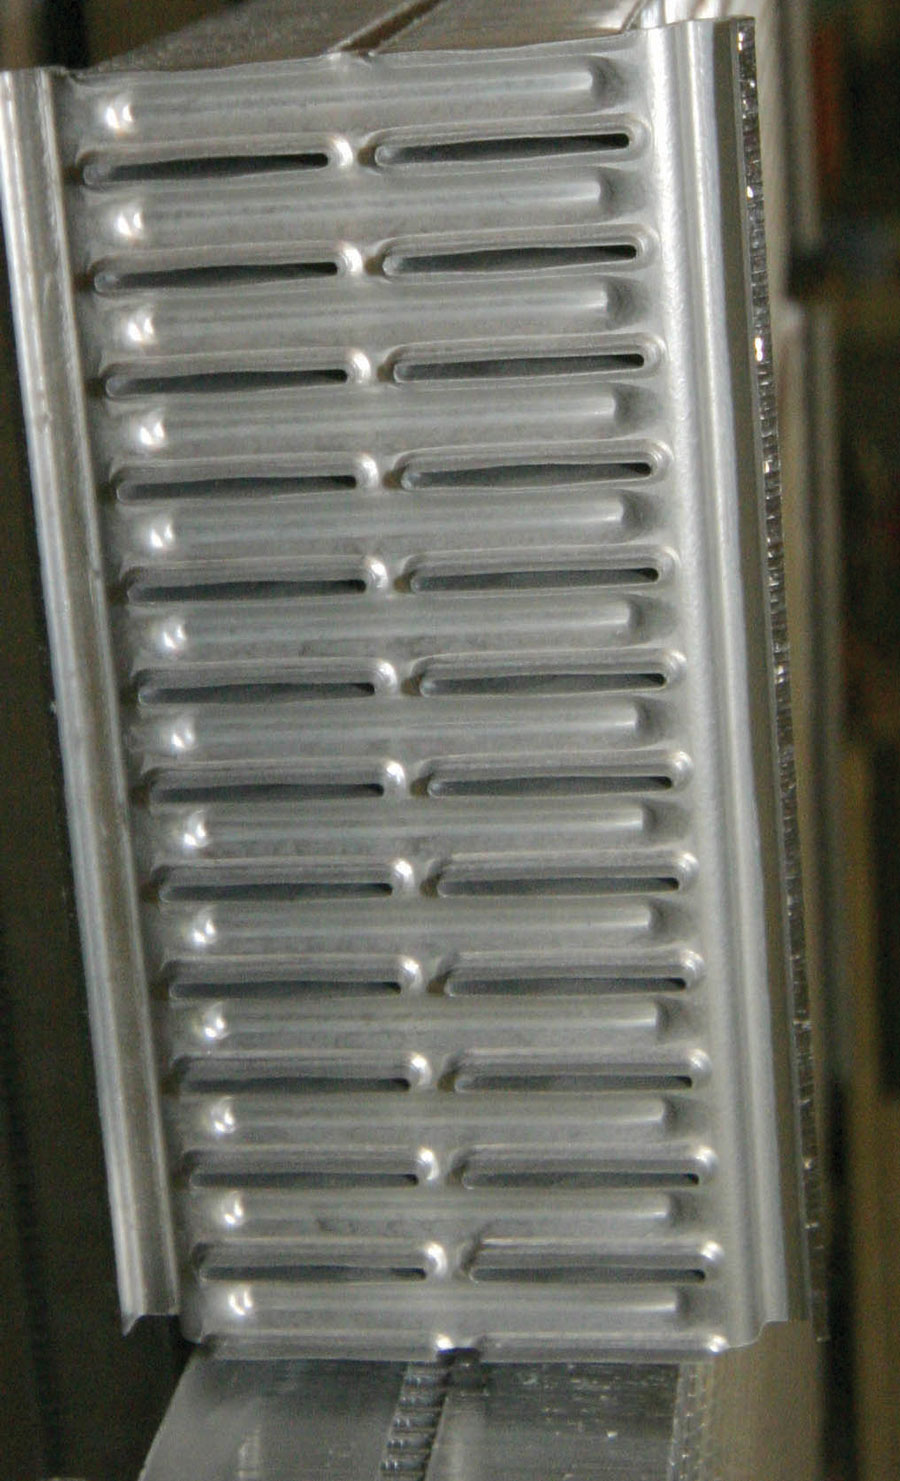 By comparison this is the header of an aluminum Afco radiator; it uses two rows of 1-inch tubes.